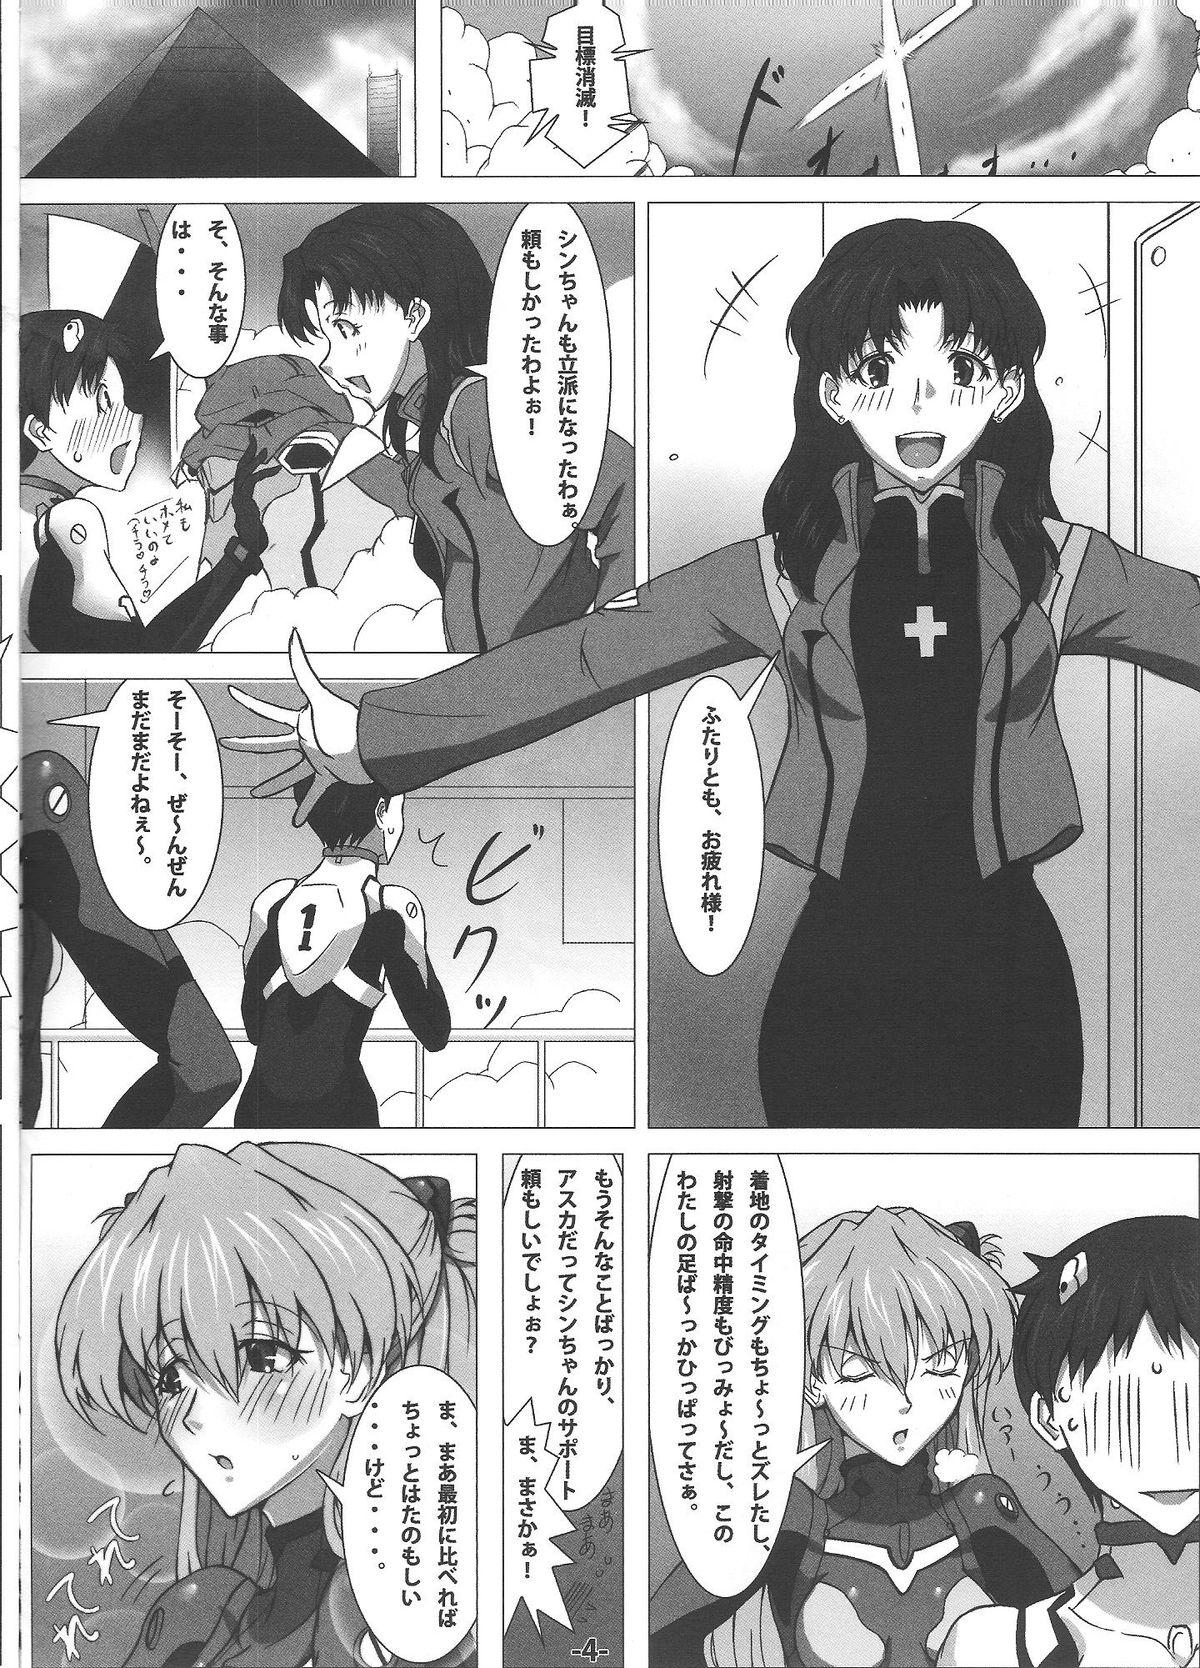 Riding Synchro Rate 200% !! - Neon genesis evangelion Dirty - Page 5